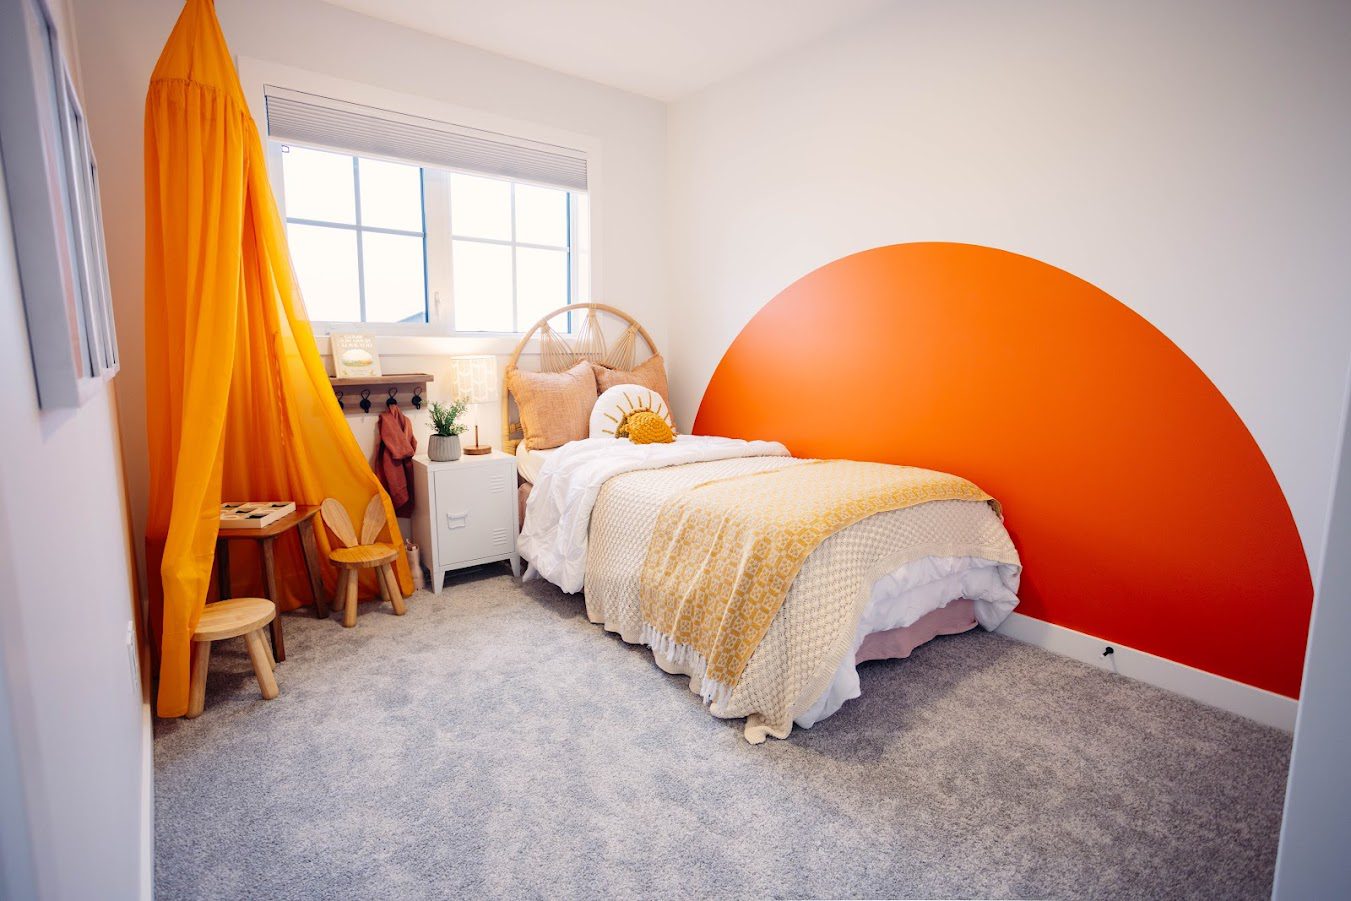 A child's bedroom with orange walls and a bed.